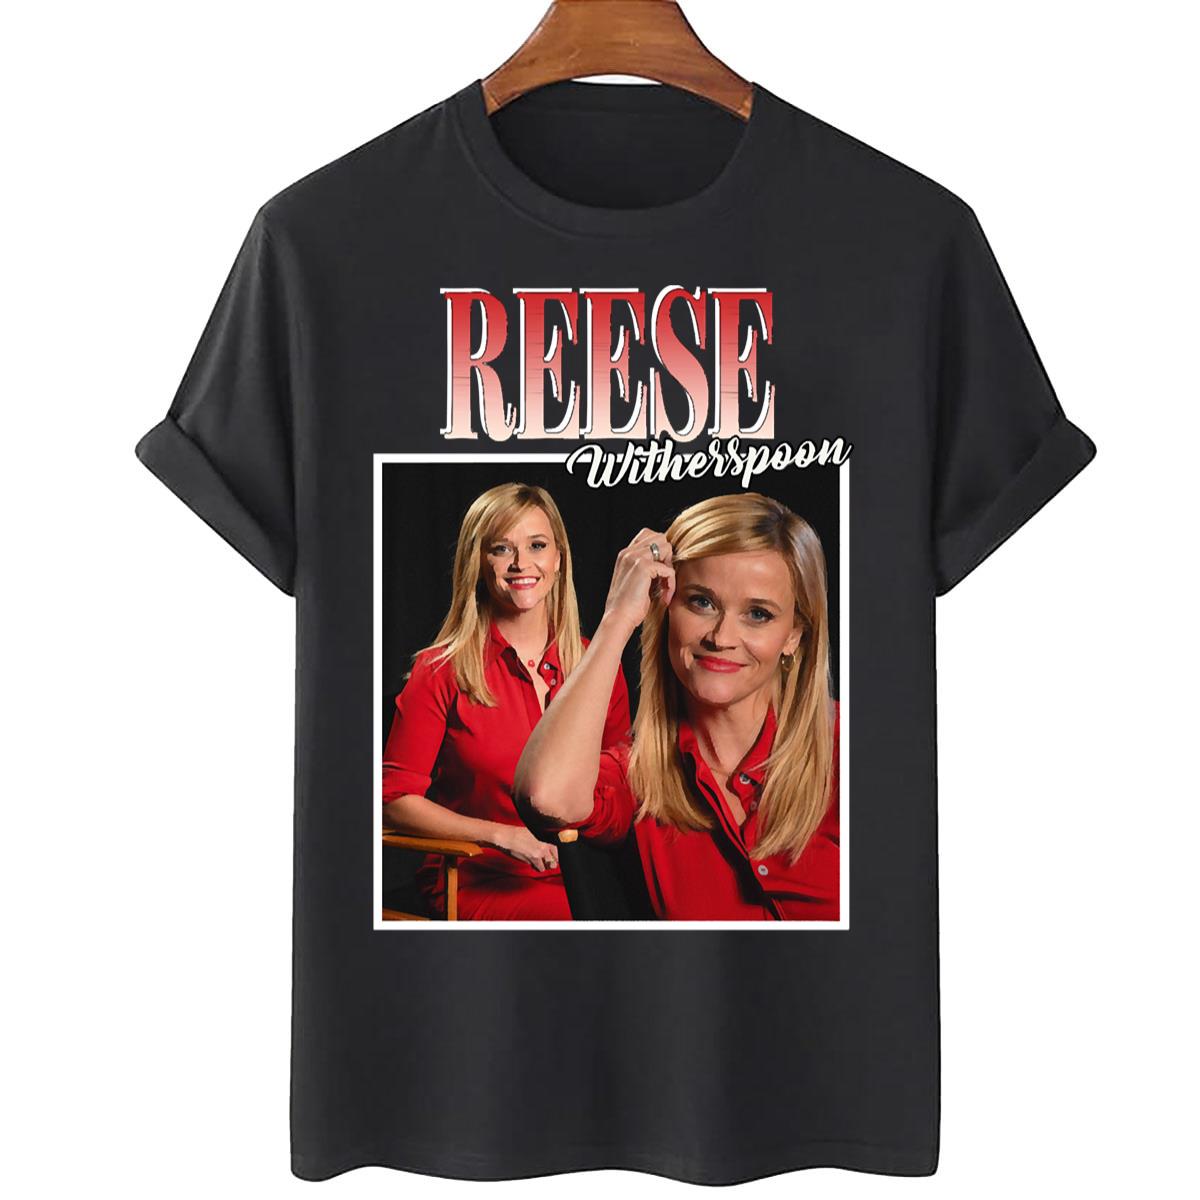 Reese Witherspoon Actress Celeb T-Shirt